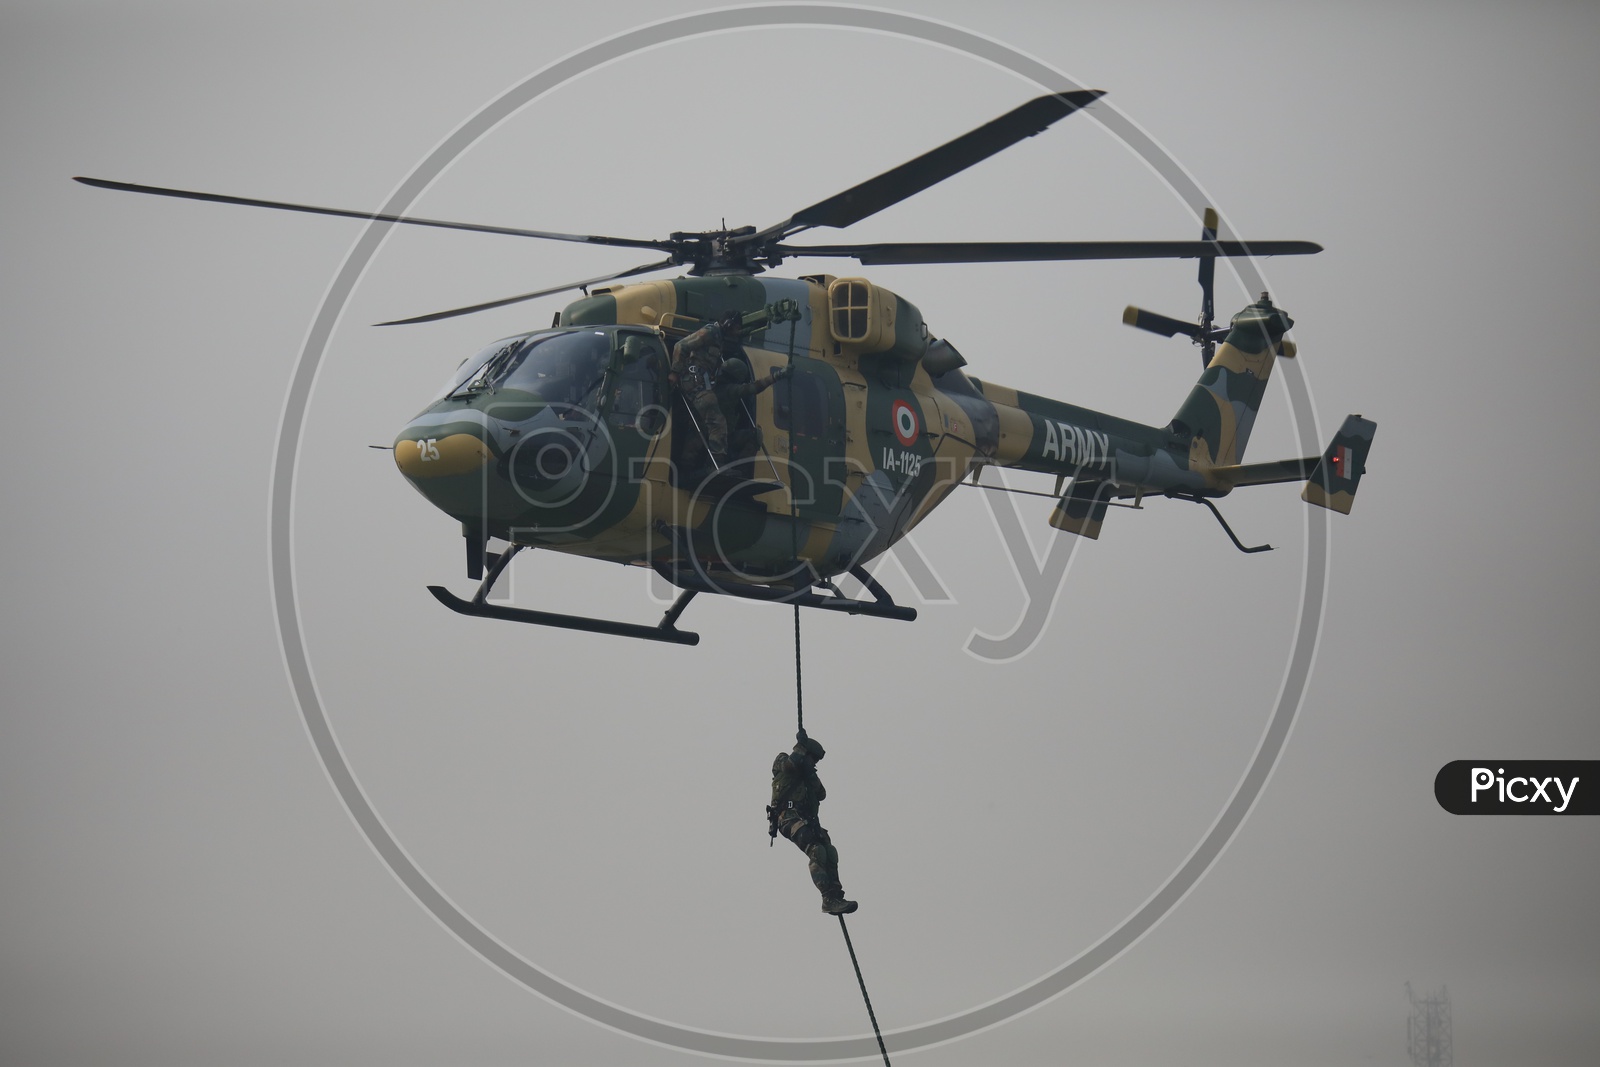 Indian Army Utility Helicopter Dhruv dropping Troops by Rope